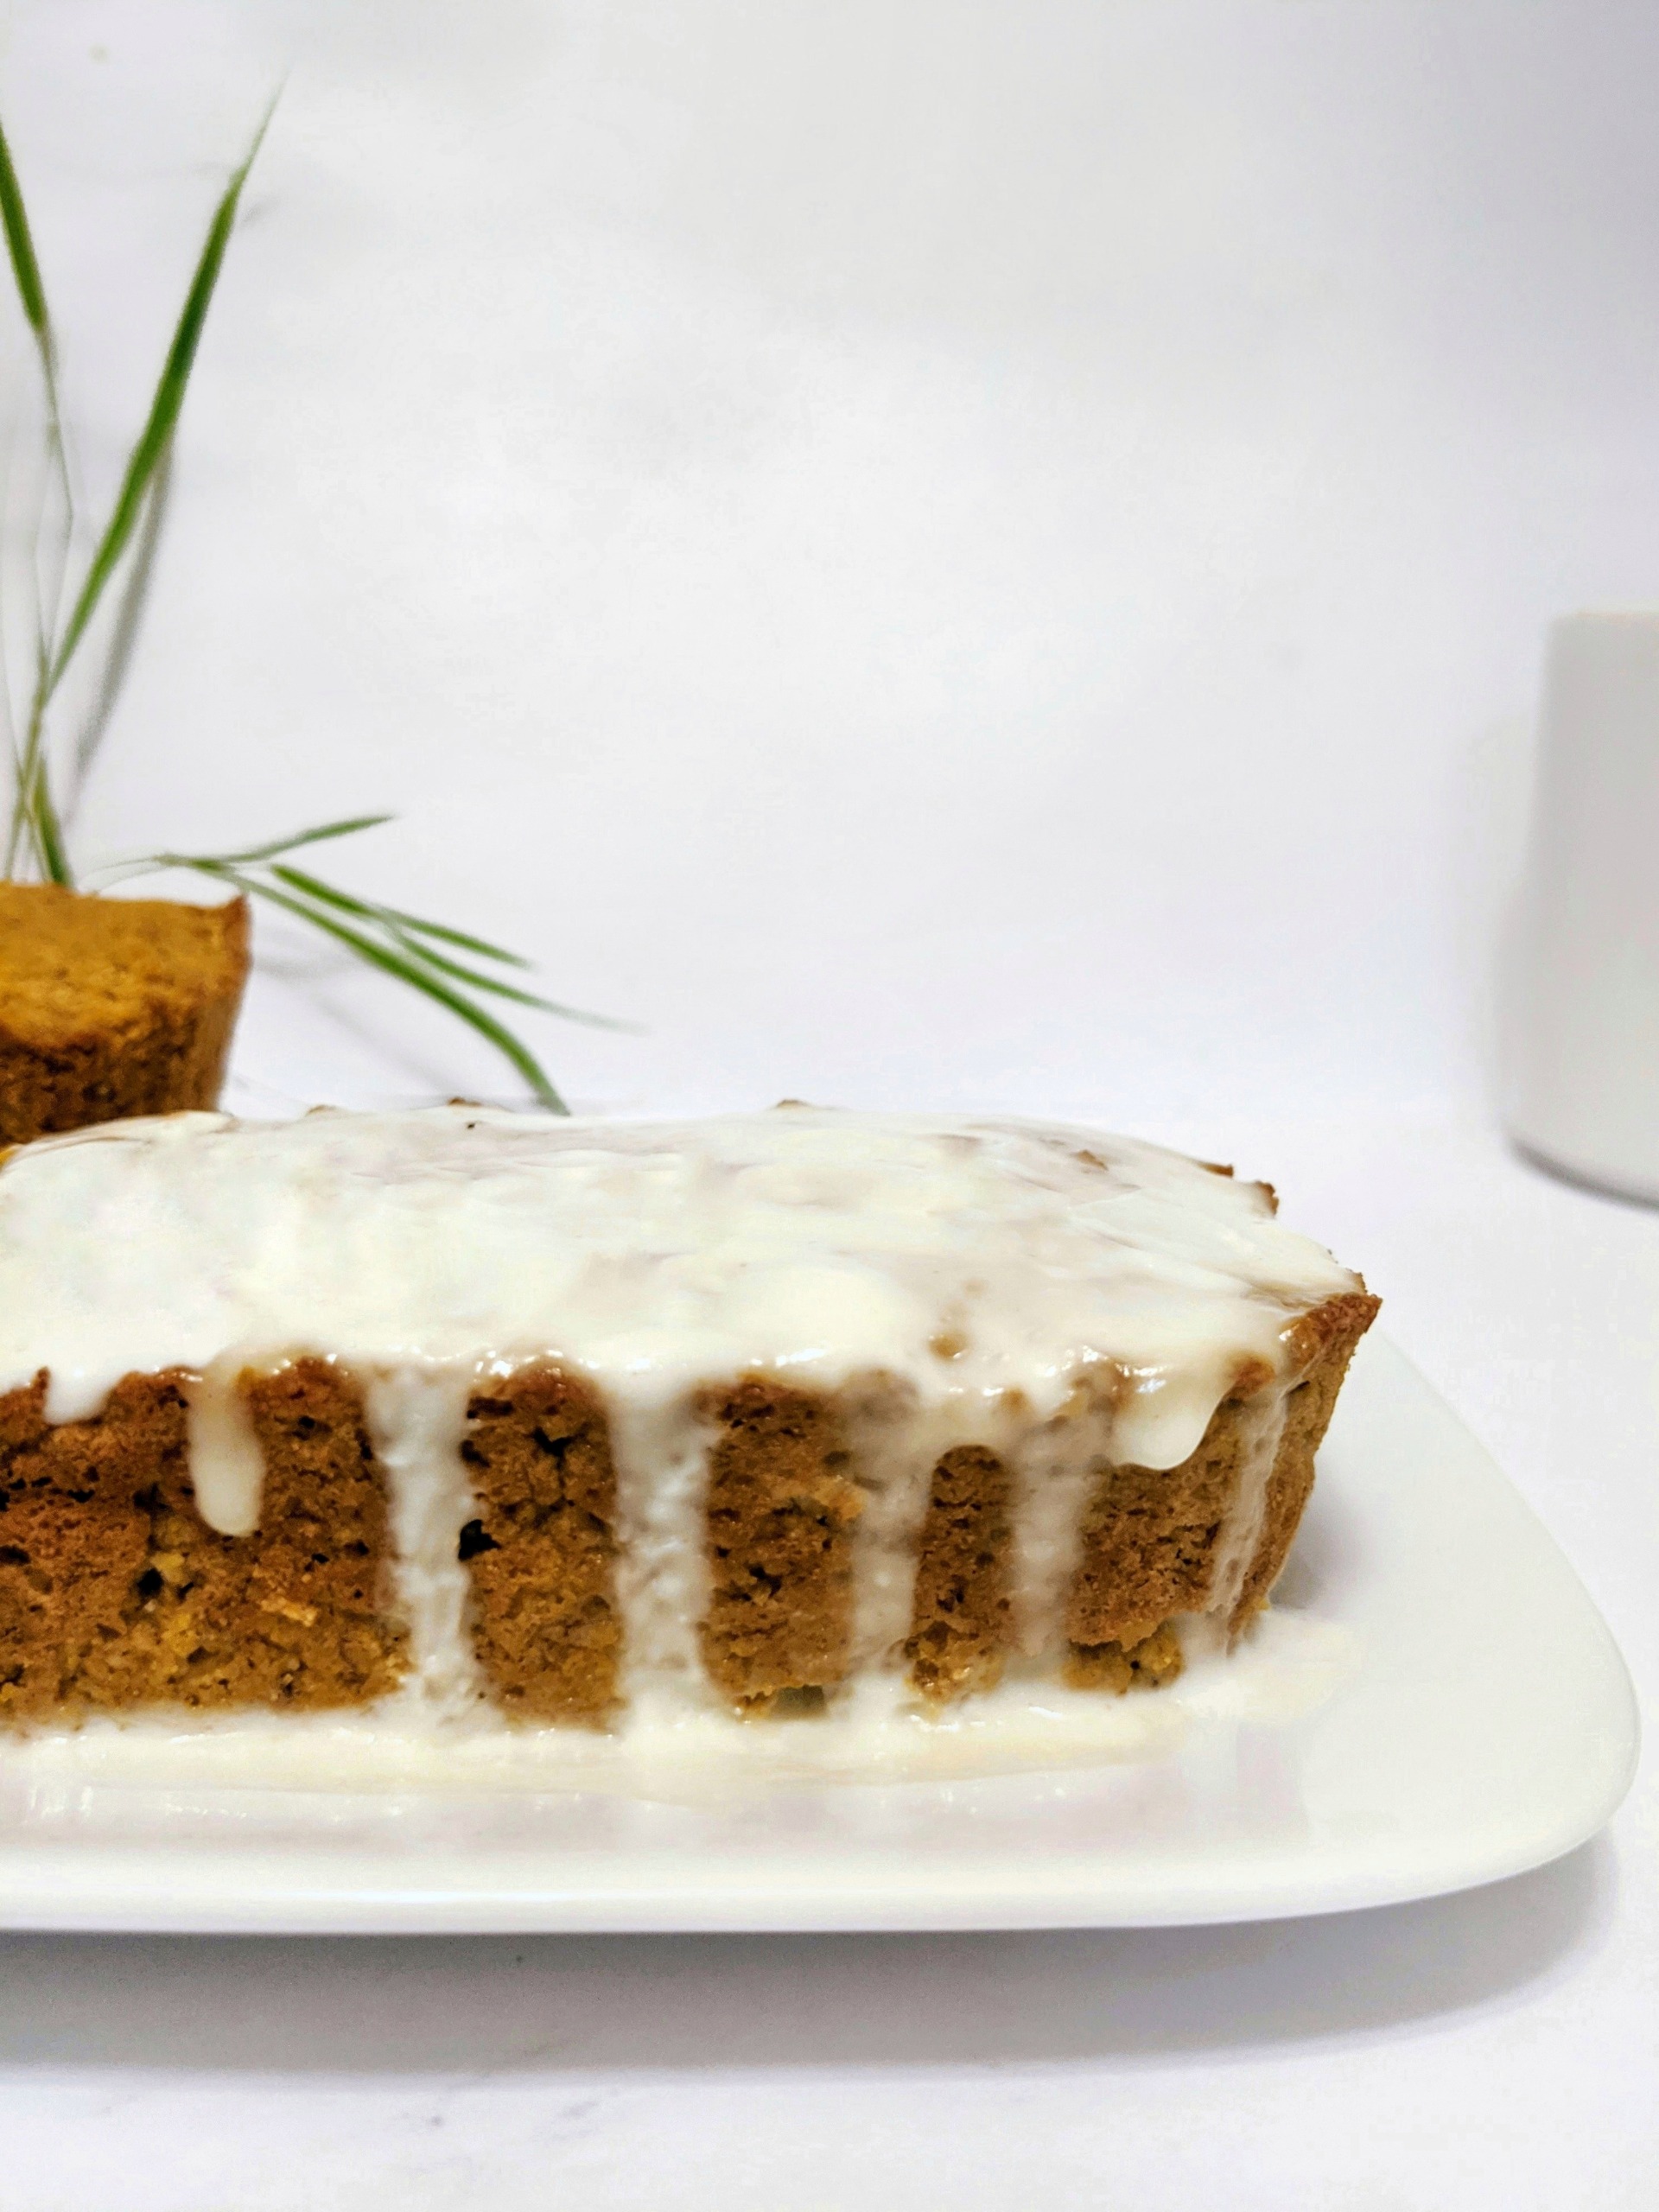 This Paleo Pumpkin Banana Bread a mashup of two classic quick breads made with coconut flour and topped with a protein-yogurt glaze. With the moist tenderness of a banana bread, and warmth of a pumpkin bread, this loaf will be your new favorite.